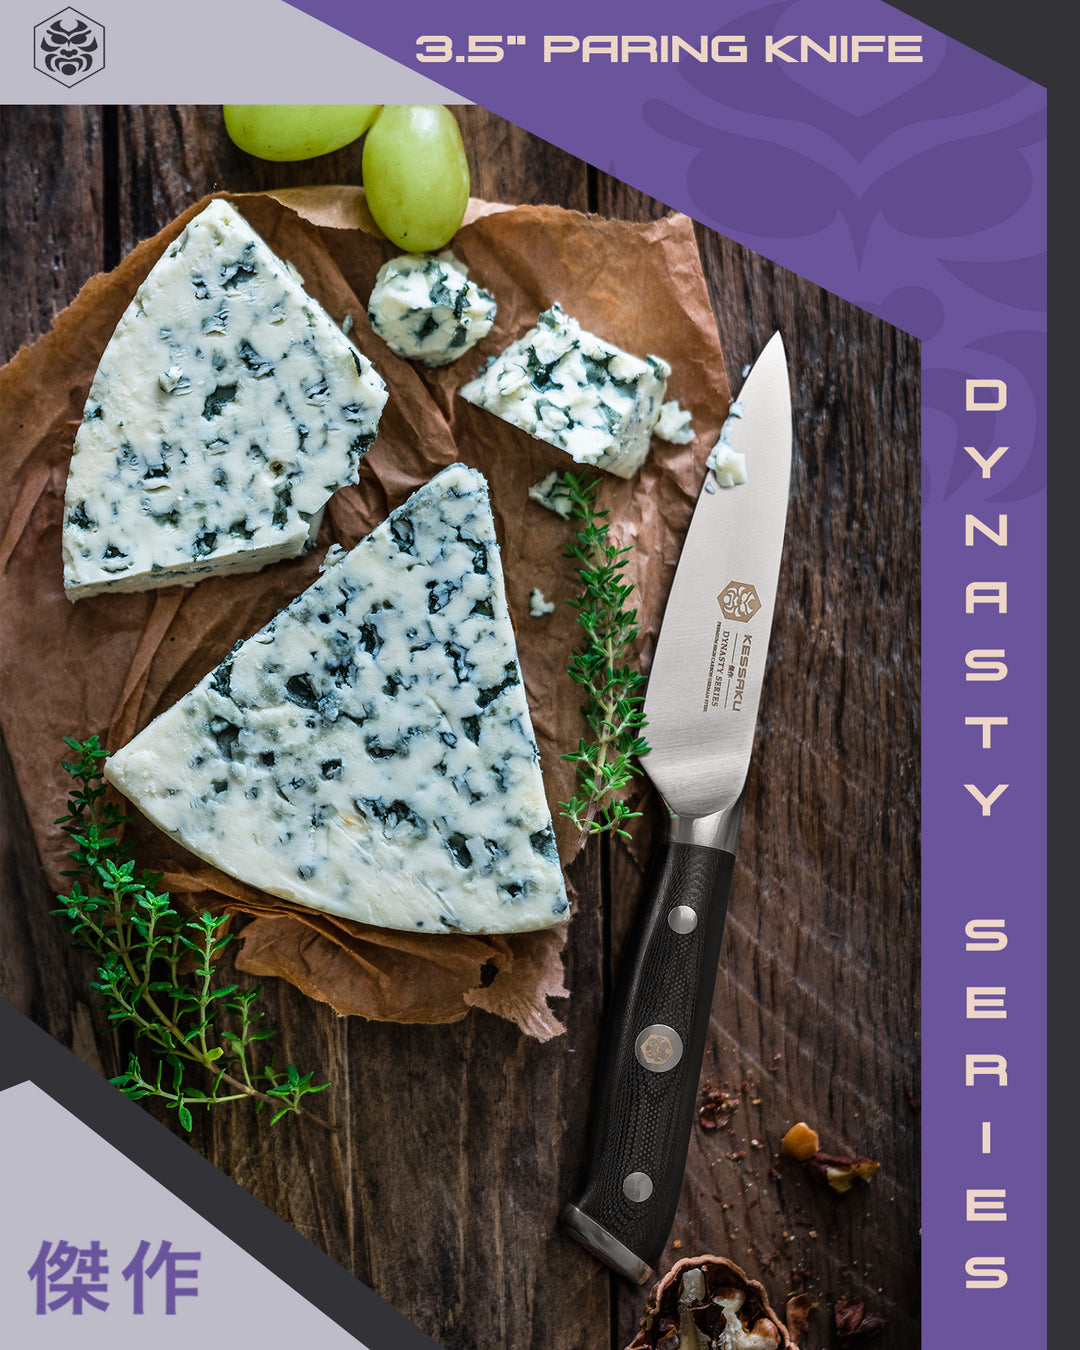 The Dynasty Paring Knife with sliced, soft cheese, pear, green grapes, and walnuts.